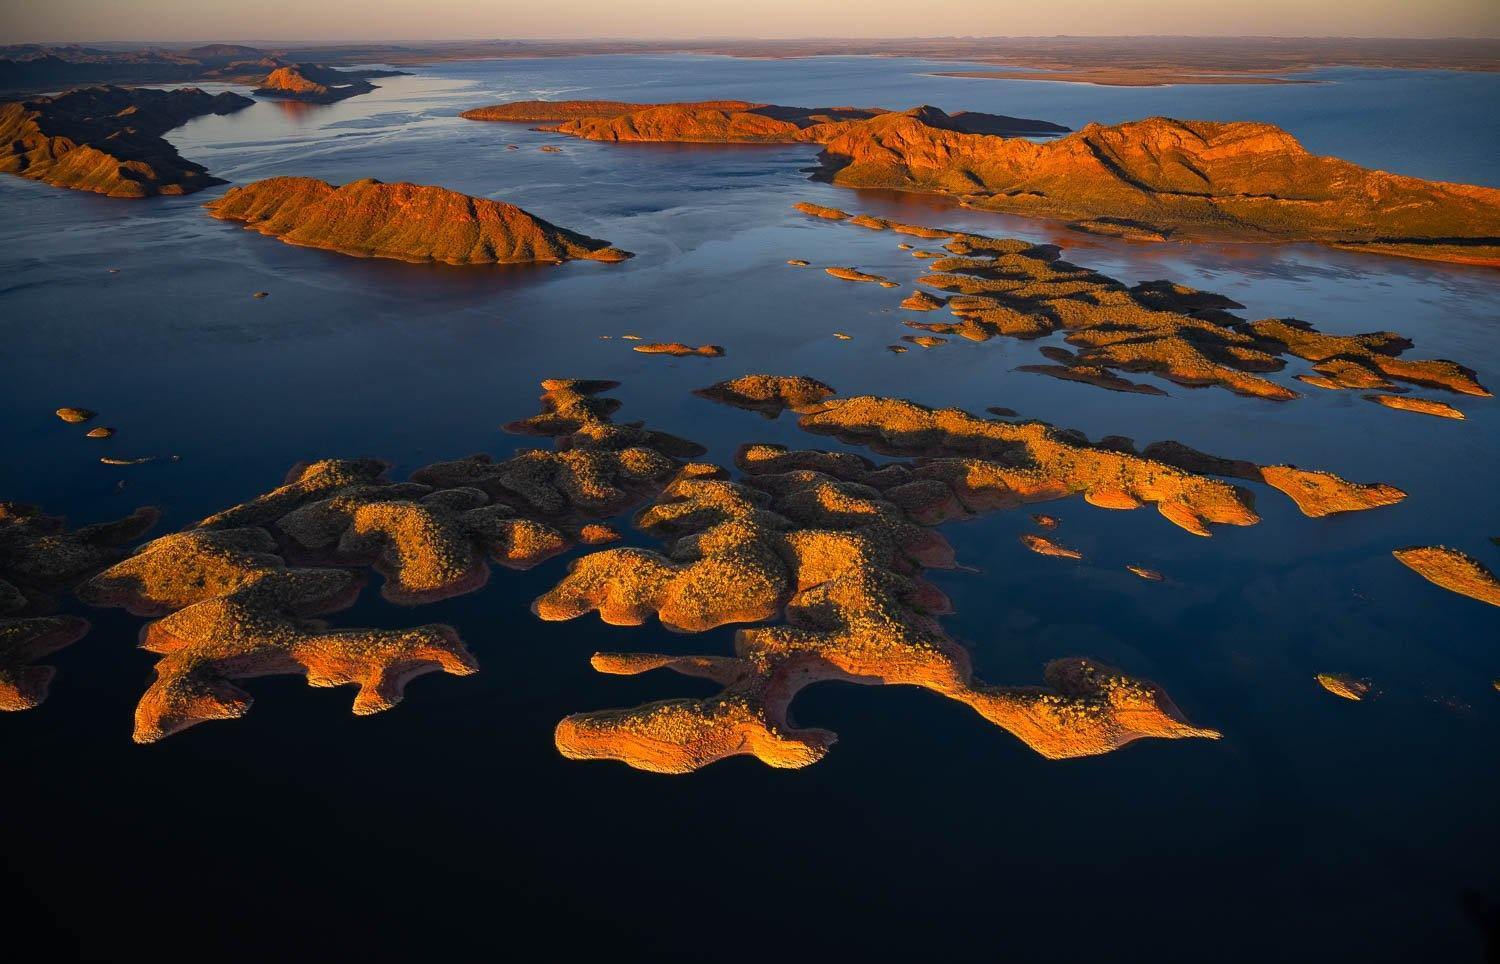 Many giant mounds of sand in the ocean, Lake Argyle #12 - The Kimberley 